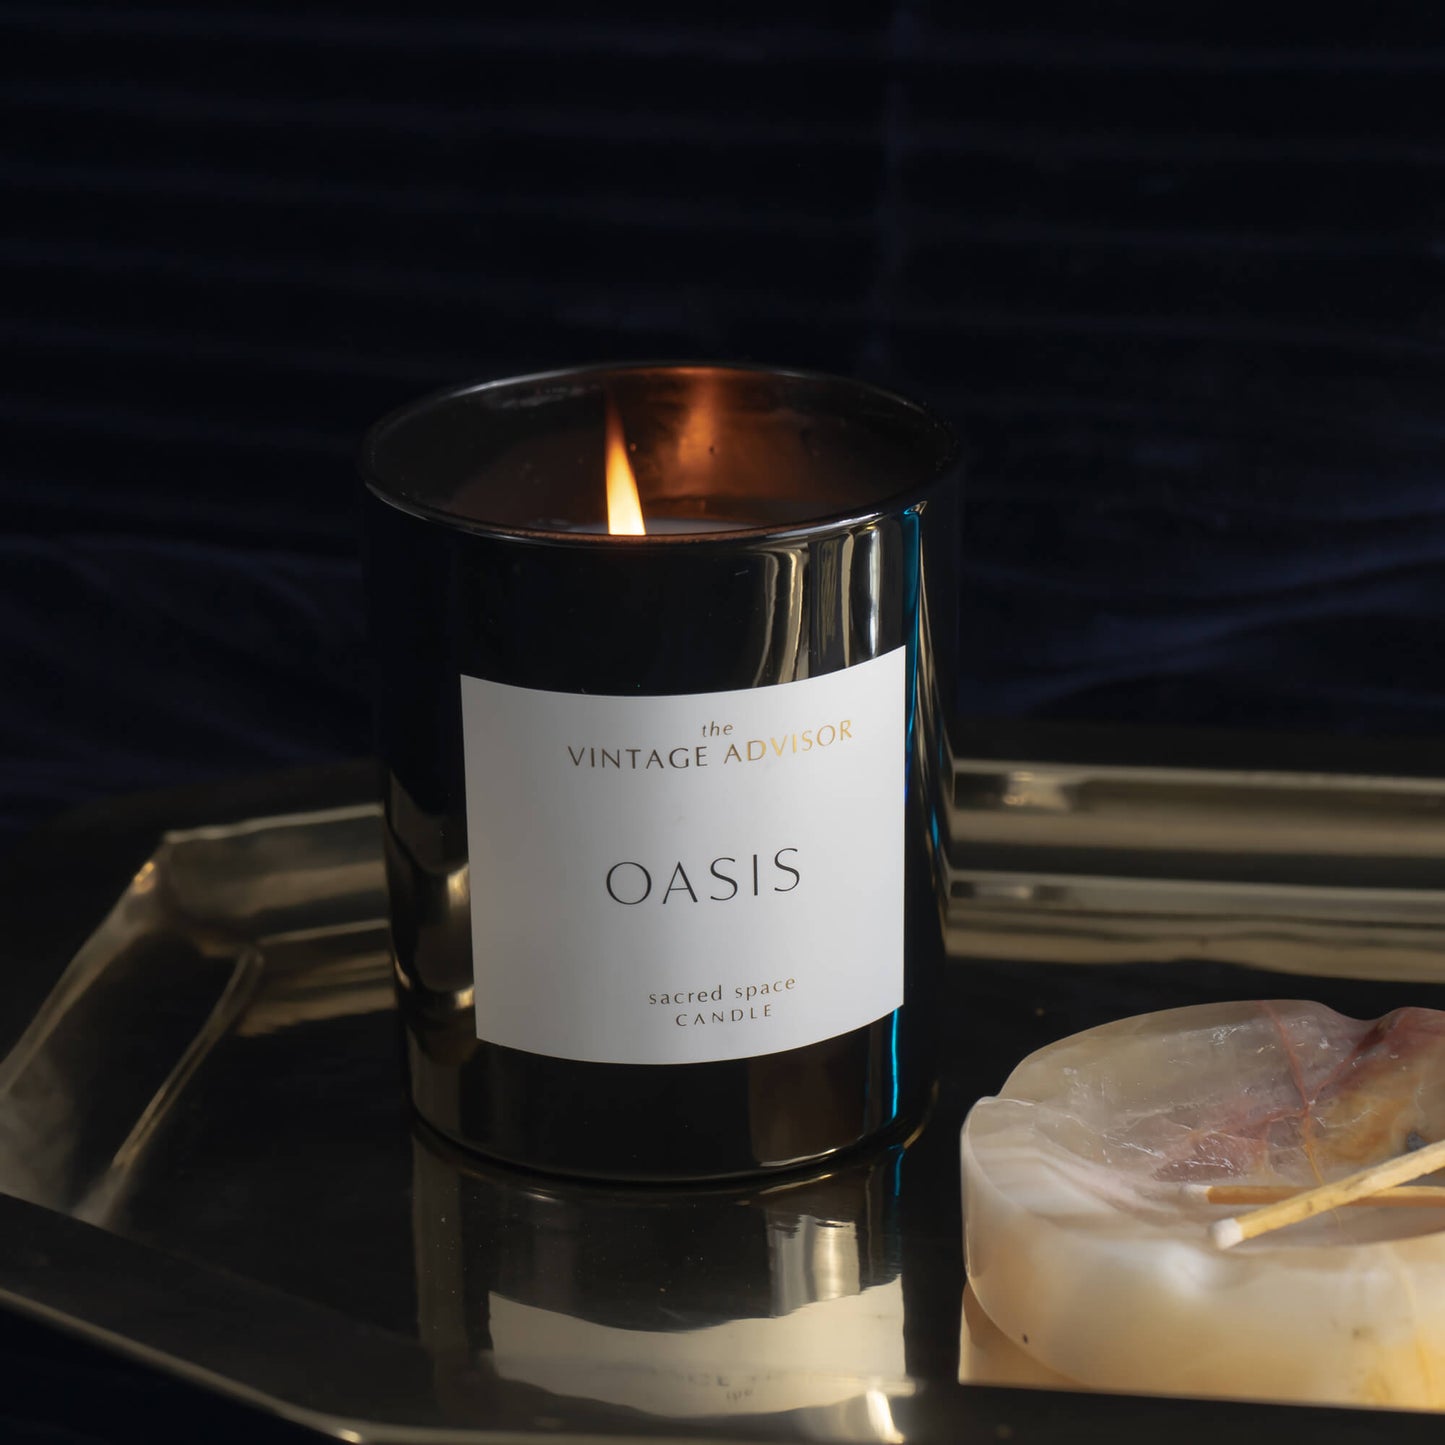 Oasis sacred space candle lit on top of a gold brass tray